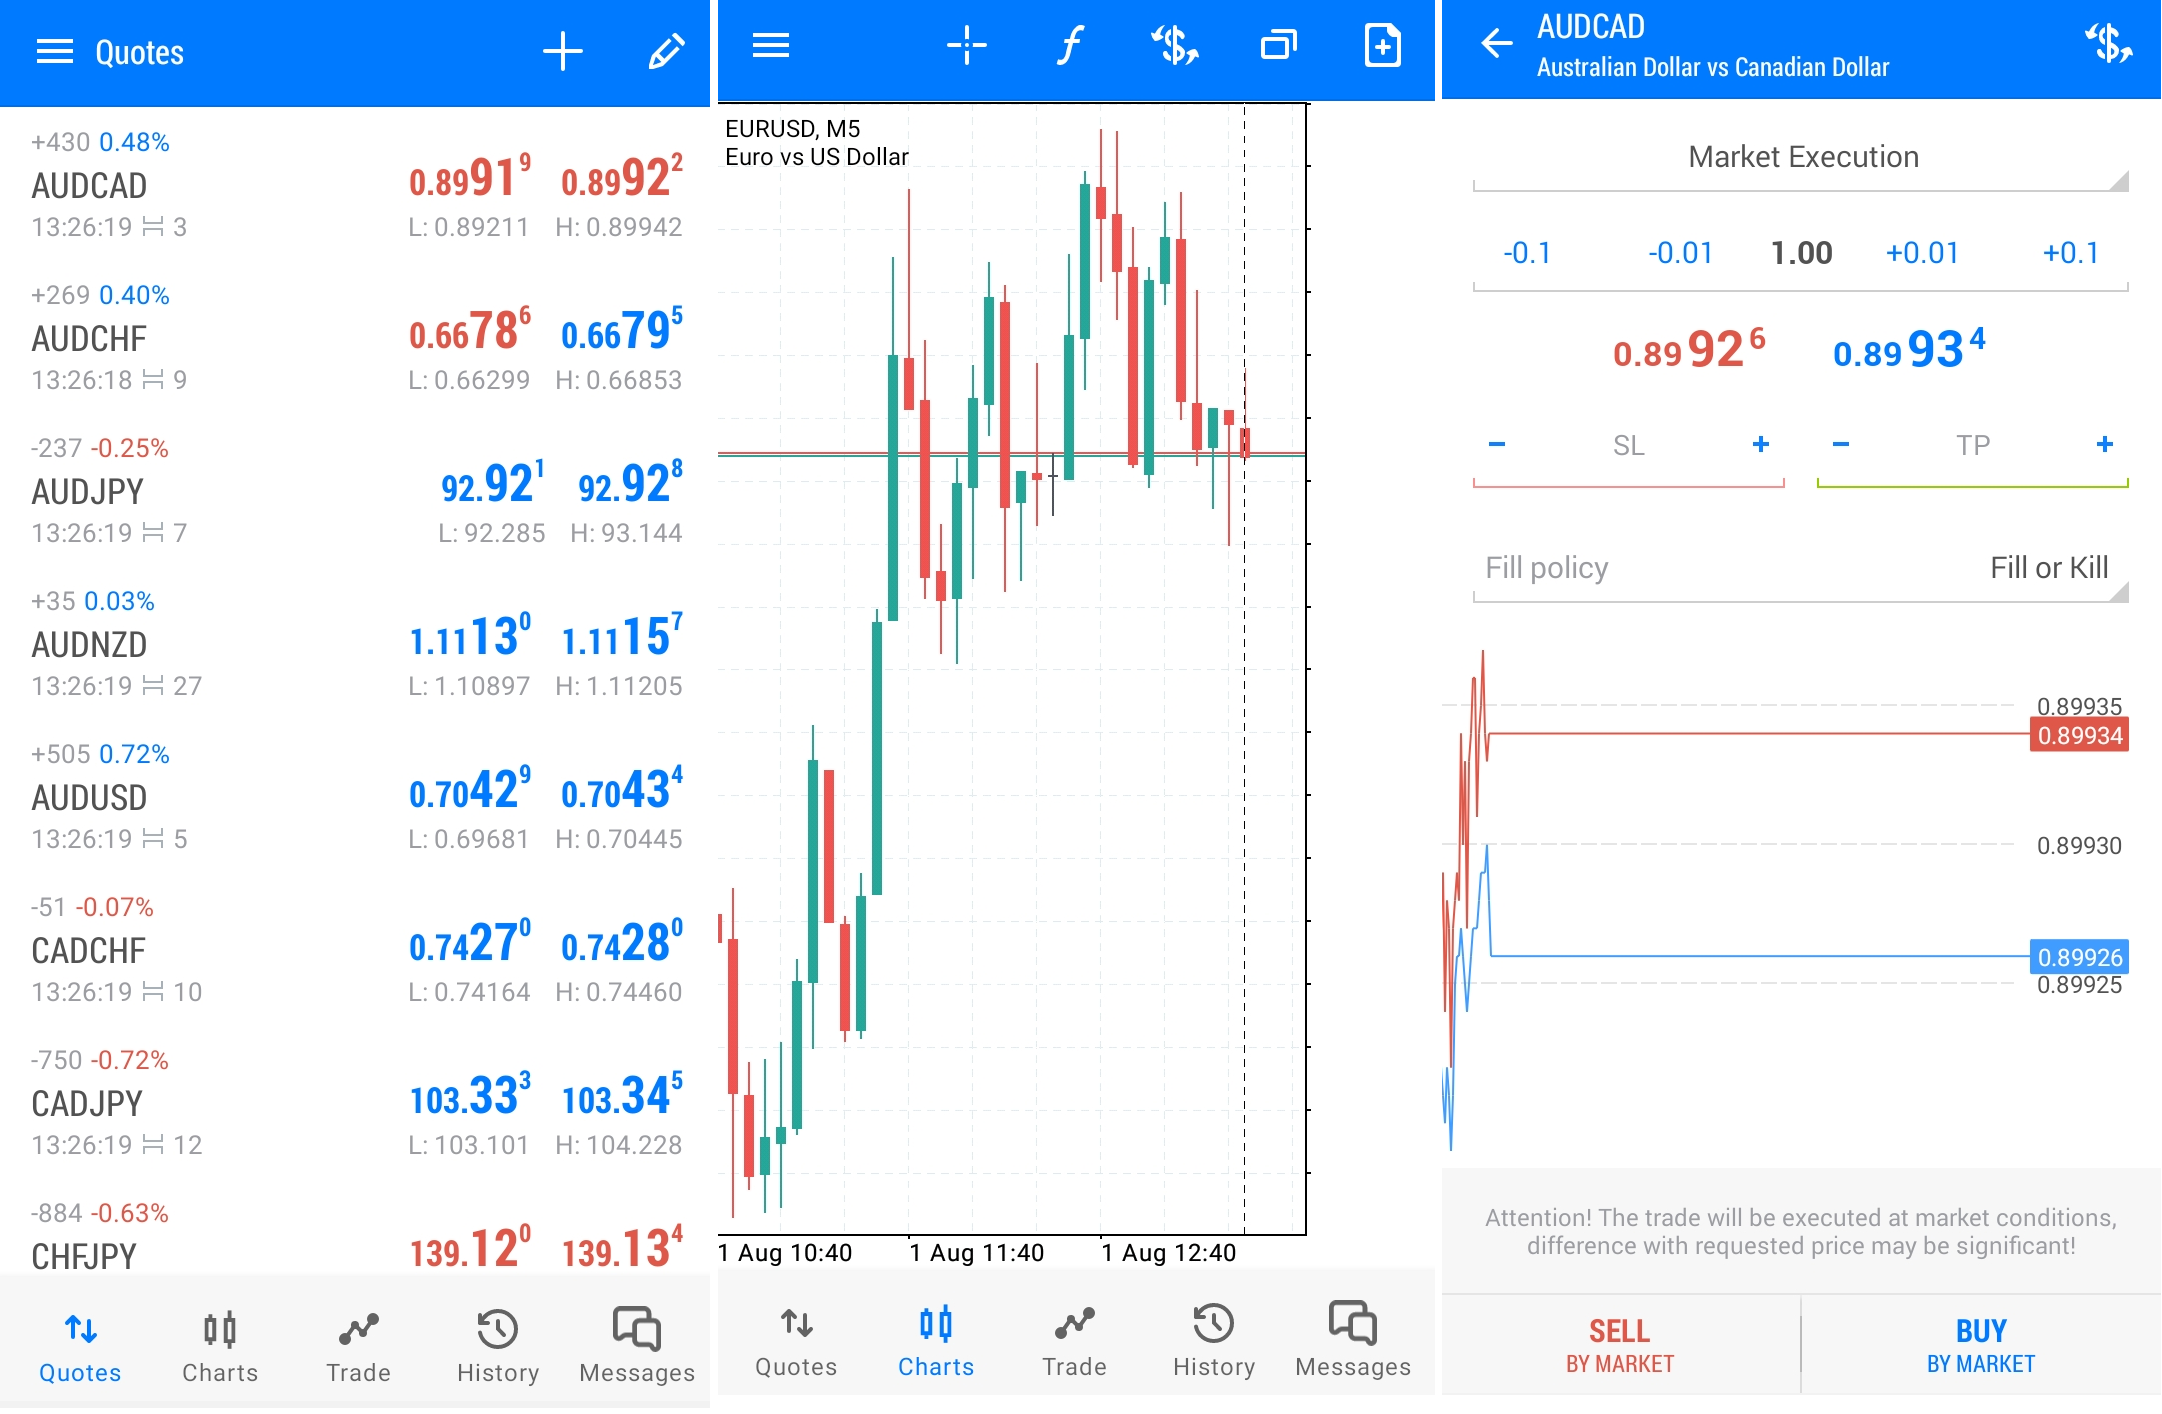 A watch list of available instruments (on the left), a chart illustrating price action (in the middle), and an order execution screen (on the right)